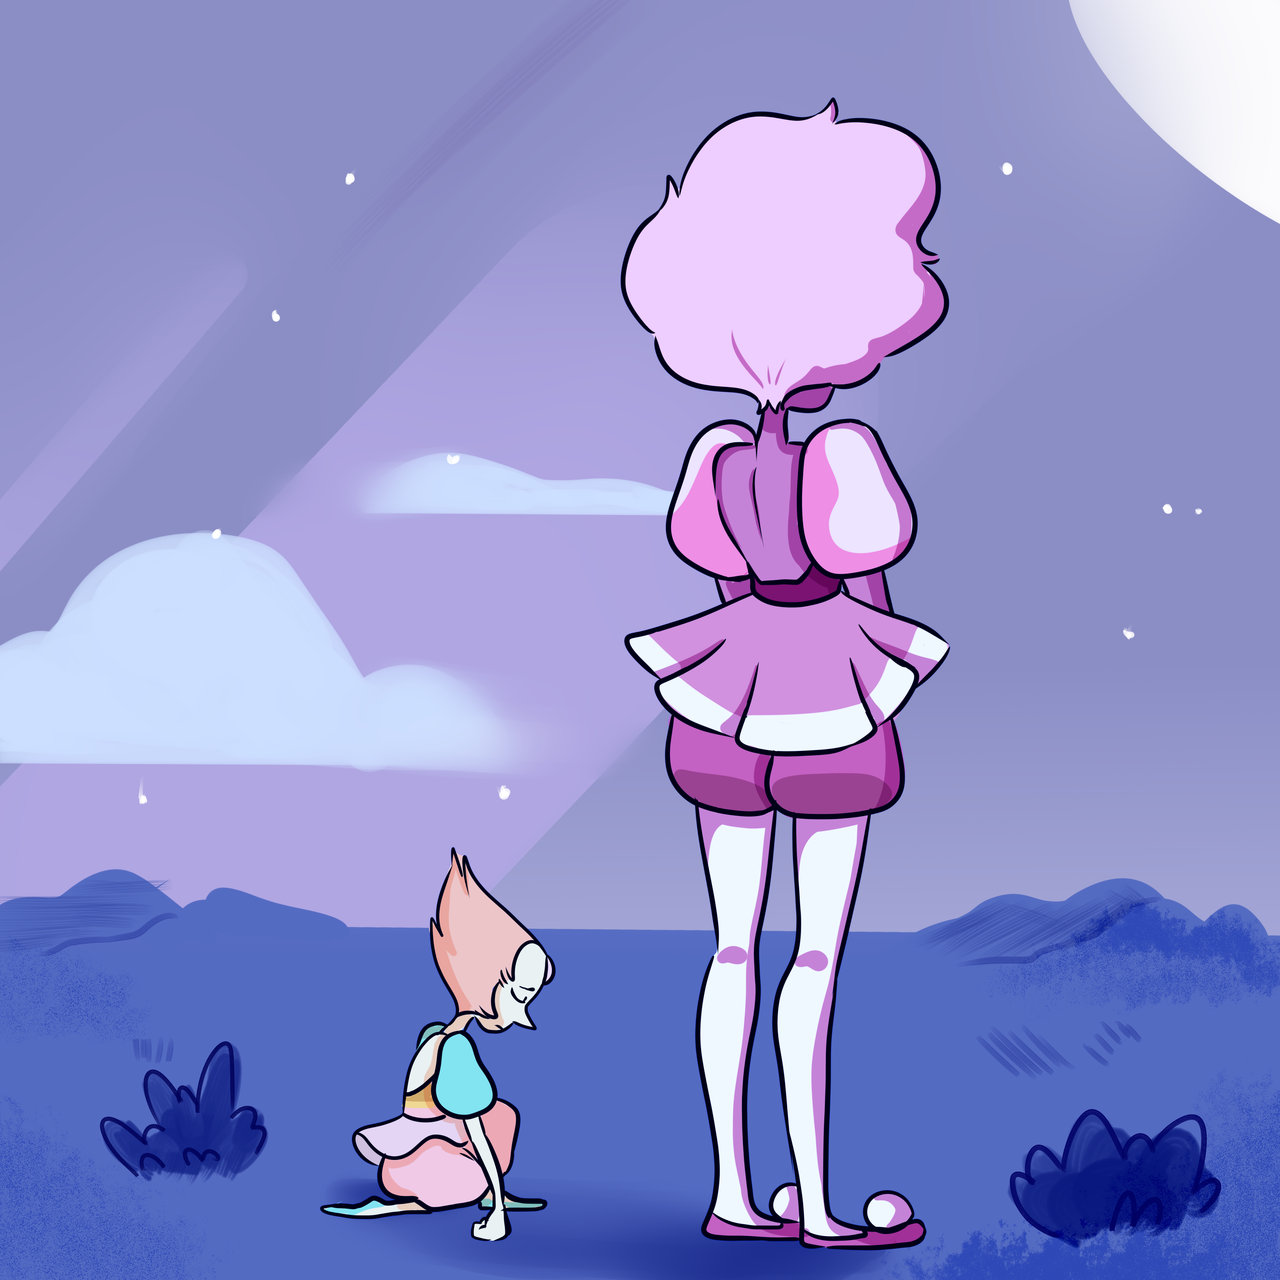 “my pearl..”